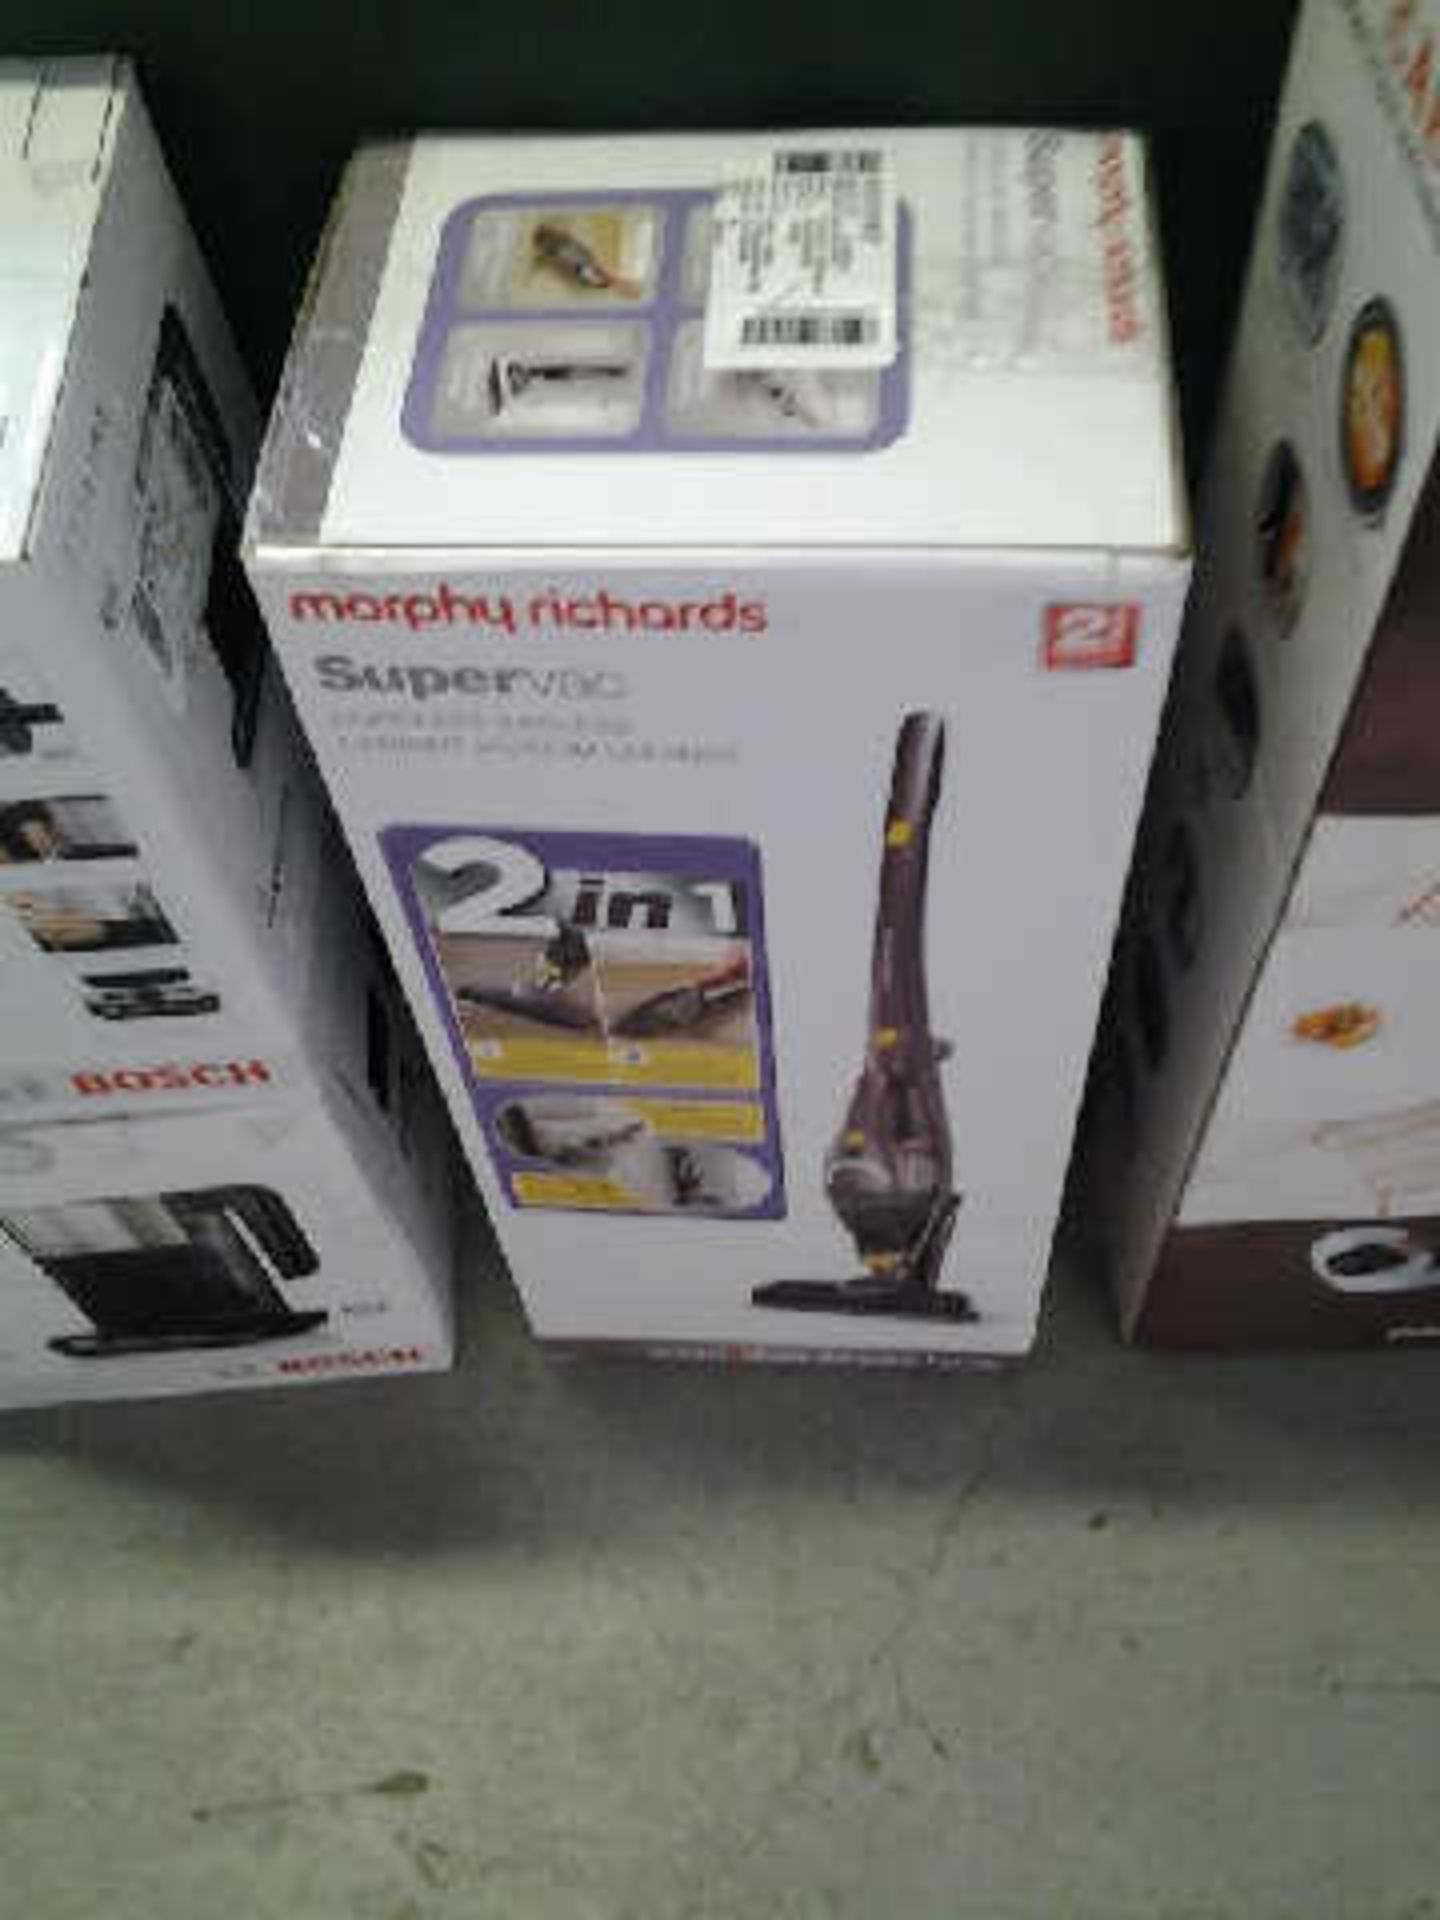 1 X BOXED MORPHY RICHARDS SUPERVAC VACUUM CLEANER